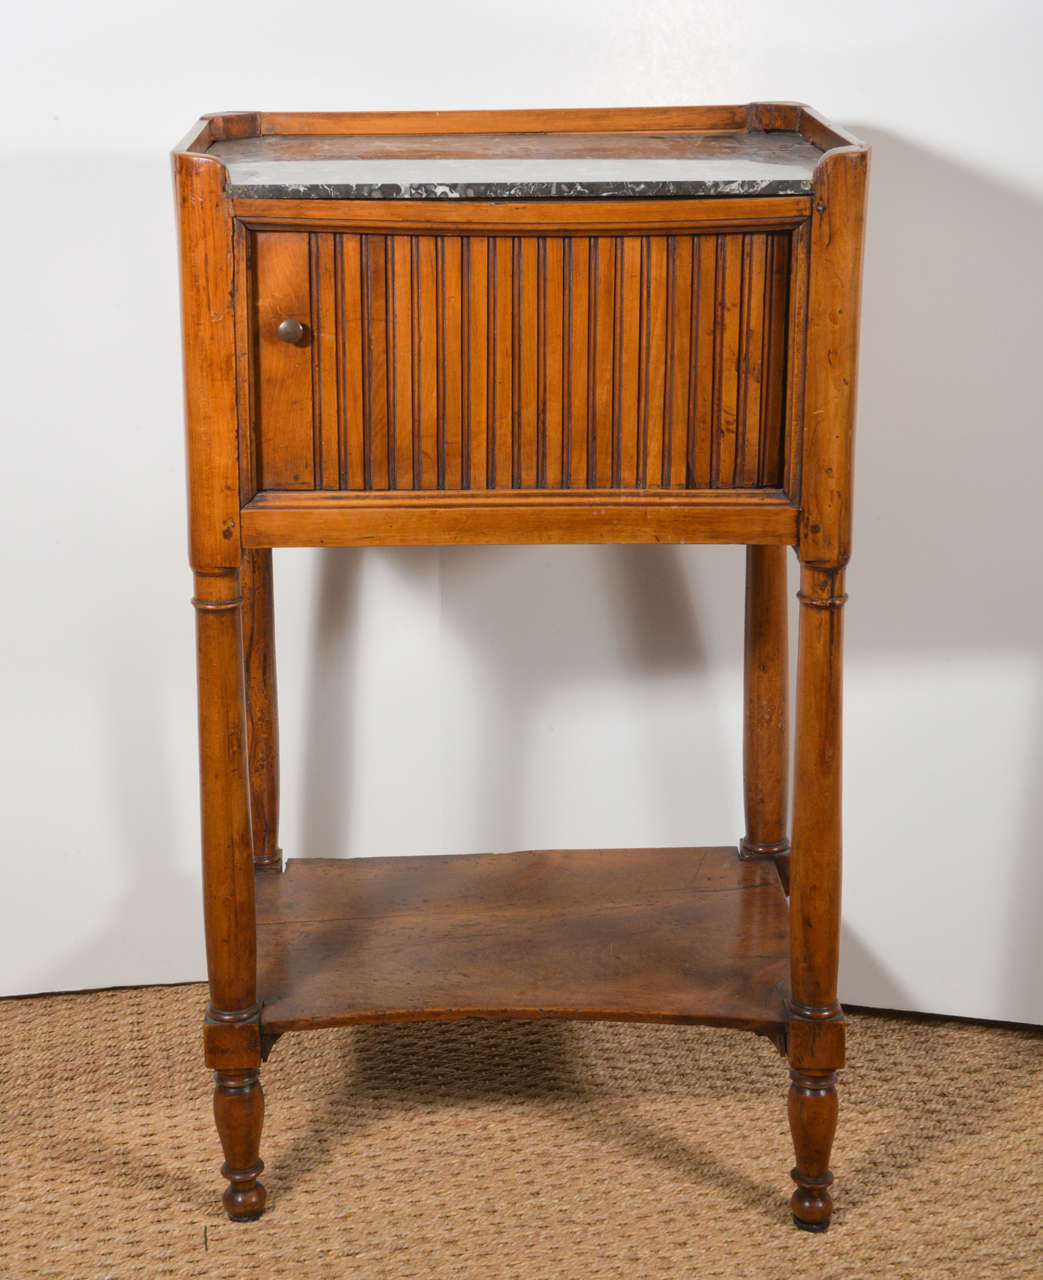 Louis XVI walnut French end table with marble top & folding sliding panel, circa 1799. This fabulous piece is the perfect side table, with its' storage display area and enough room on top for a lamp. It is sure to add warmth and charm to any room in